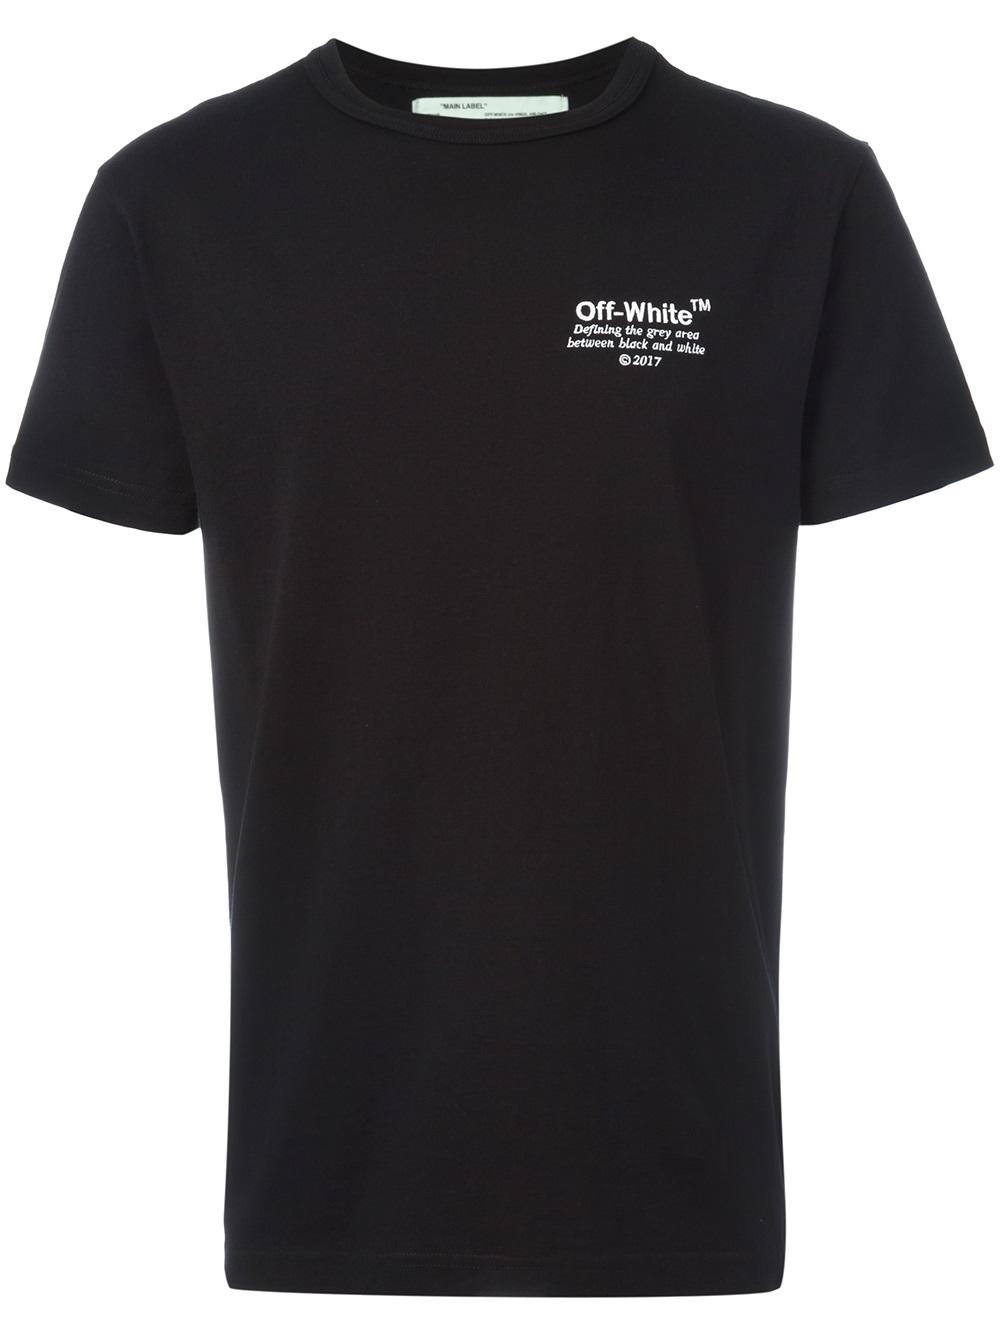 Off-White embroidered T-shirt BLACK Men Clothing T-Shirts